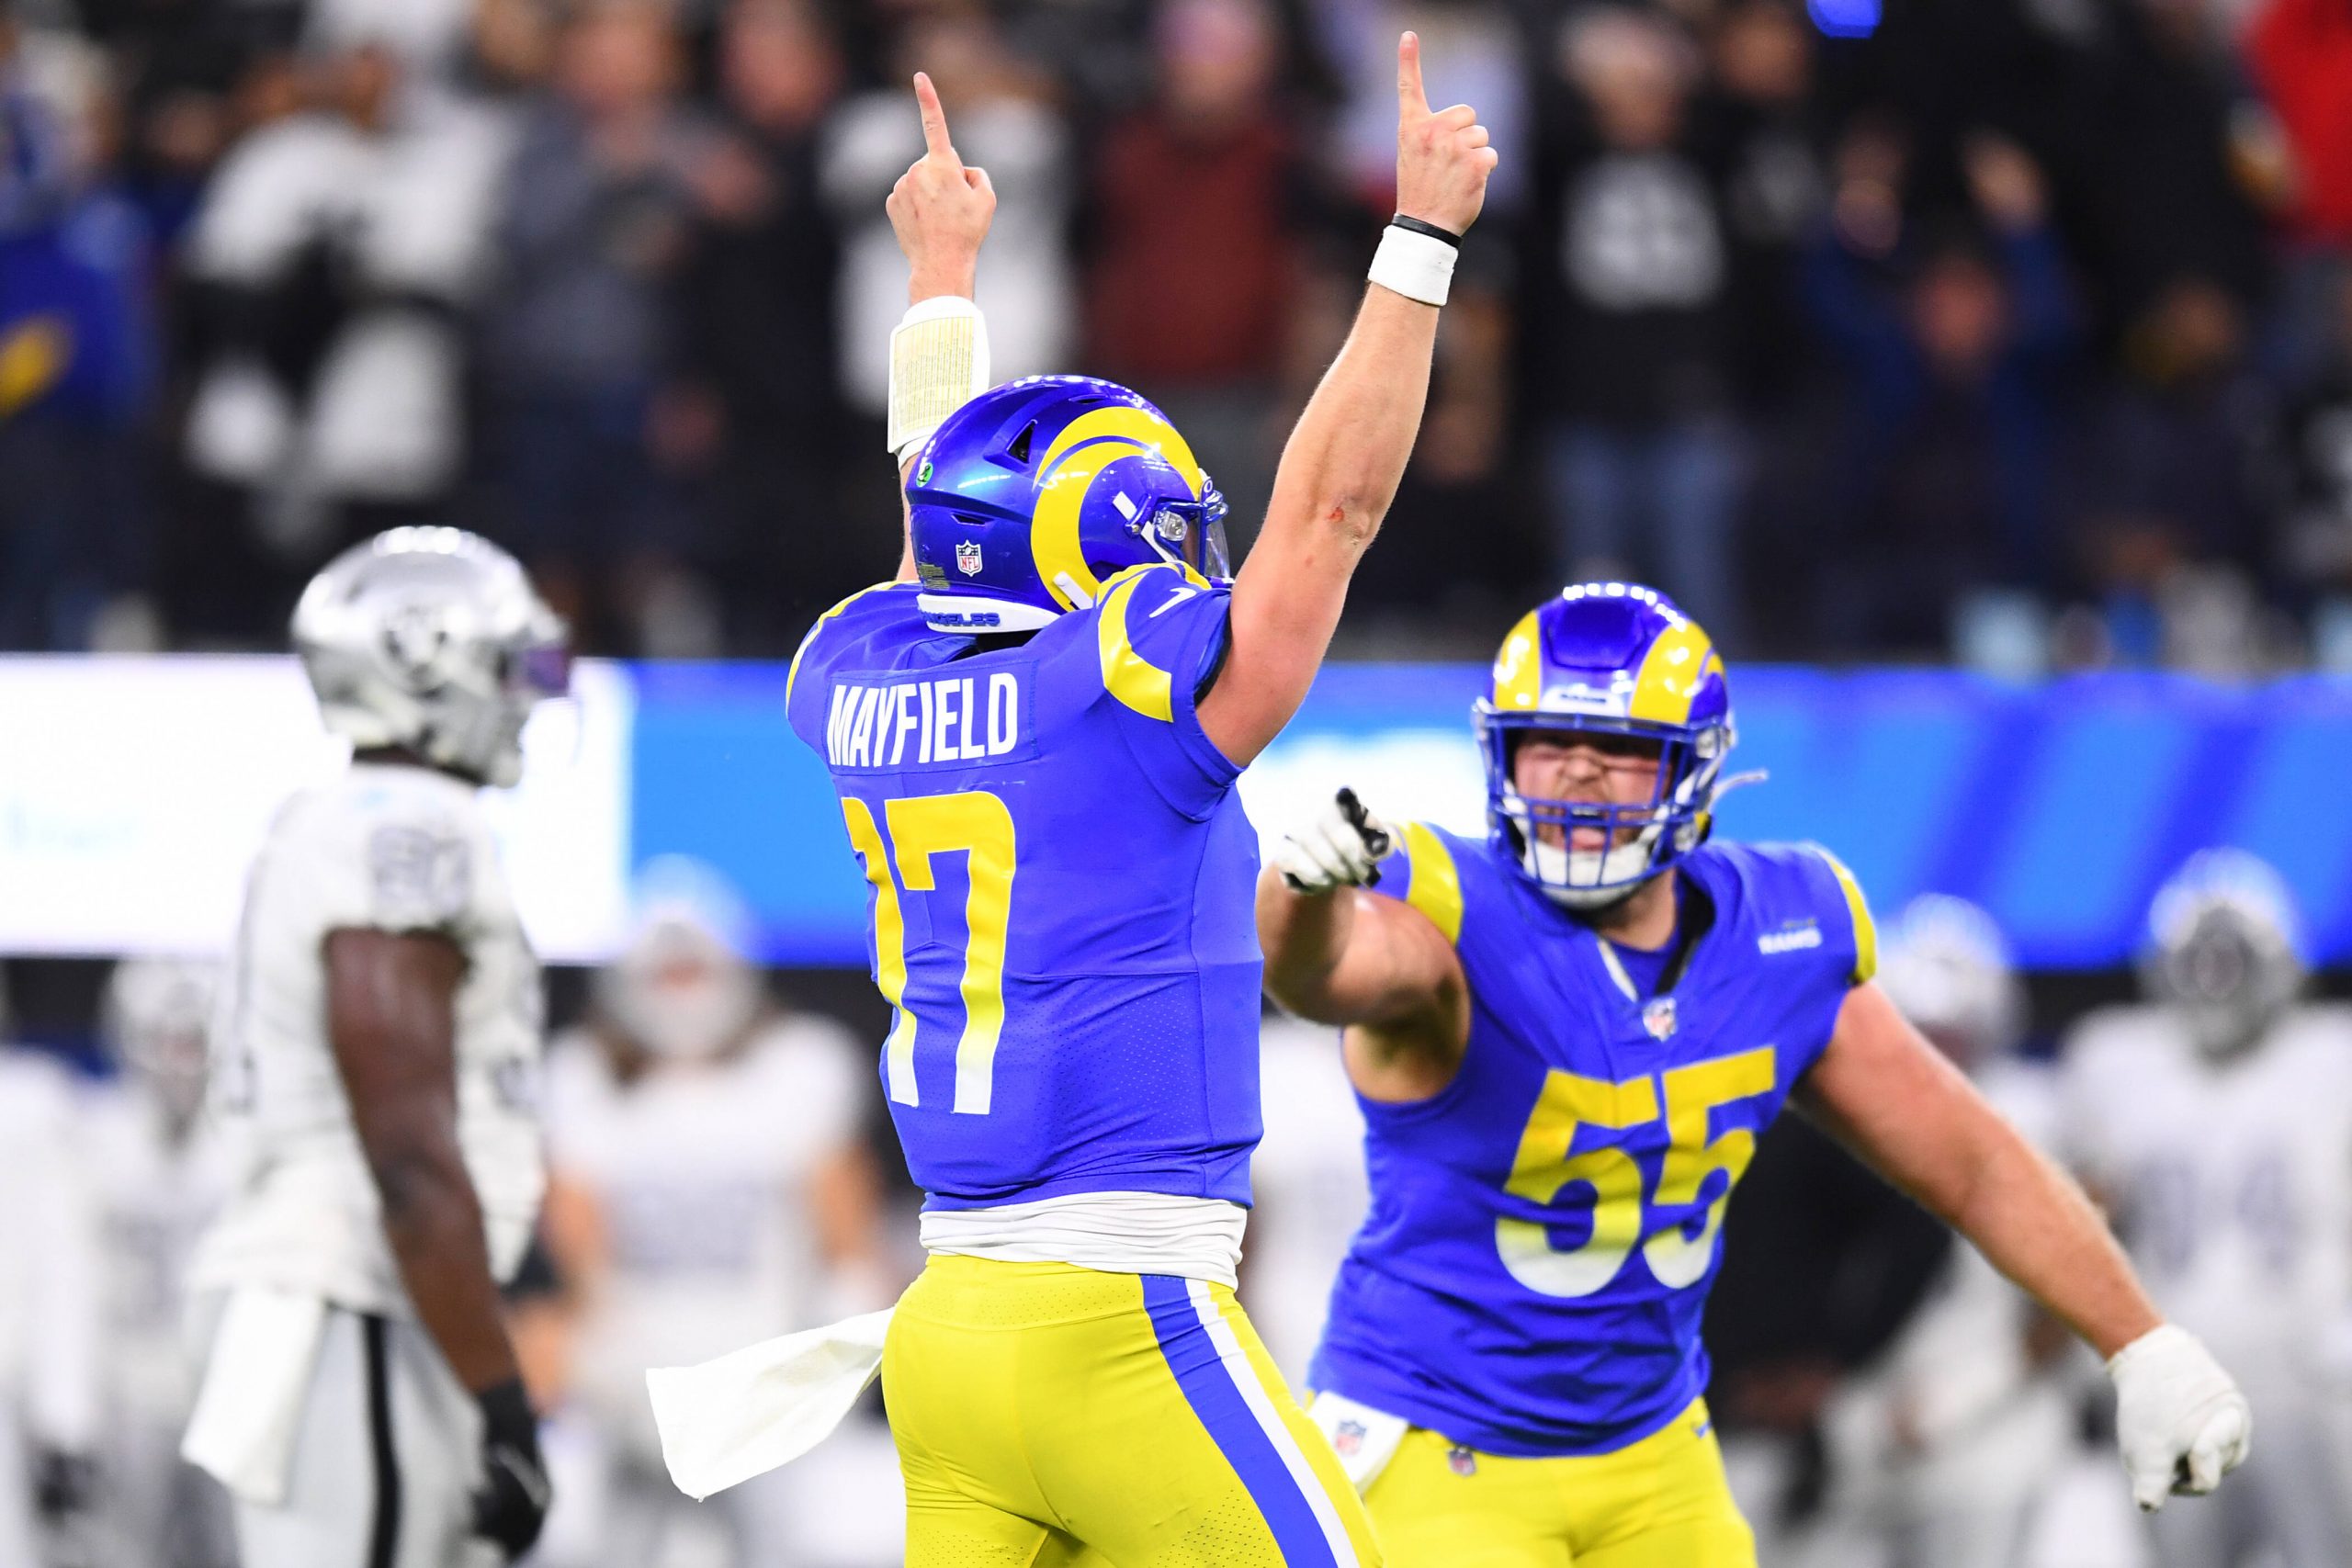 Baker Mayfield - INGLEWOOD, CA - DECEMBER 08: Los Angeles Rams quarterback Baker Mayfield 17 celebrates after throwing the game winning touchdown during the NFL, American Football Herren, USA game between the Las Vegas Raiders and the Los Angeles Rams on December 8, 2022, at SoFi Stadium in Inglewood, CA. Photo by Brian Rothmuller/Icon Sportswire NFL: DEC 08 Raiders at Rams Icon221208028